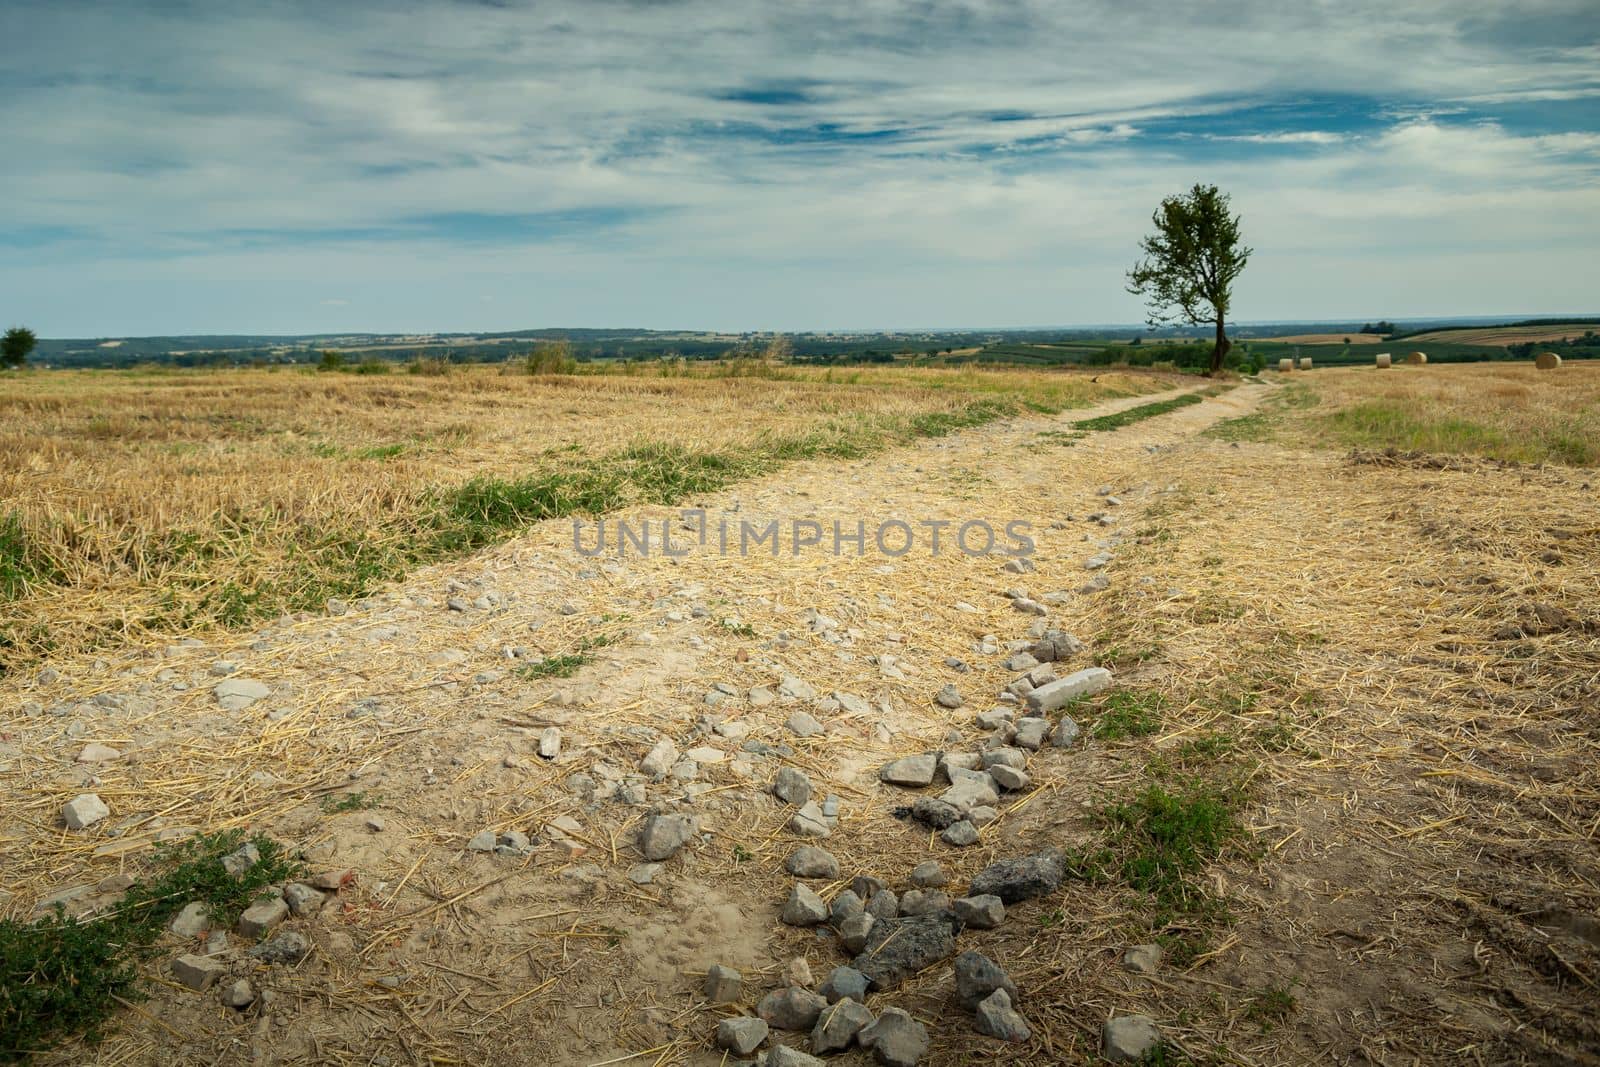 Stones on a dirt road through the fields by darekb22